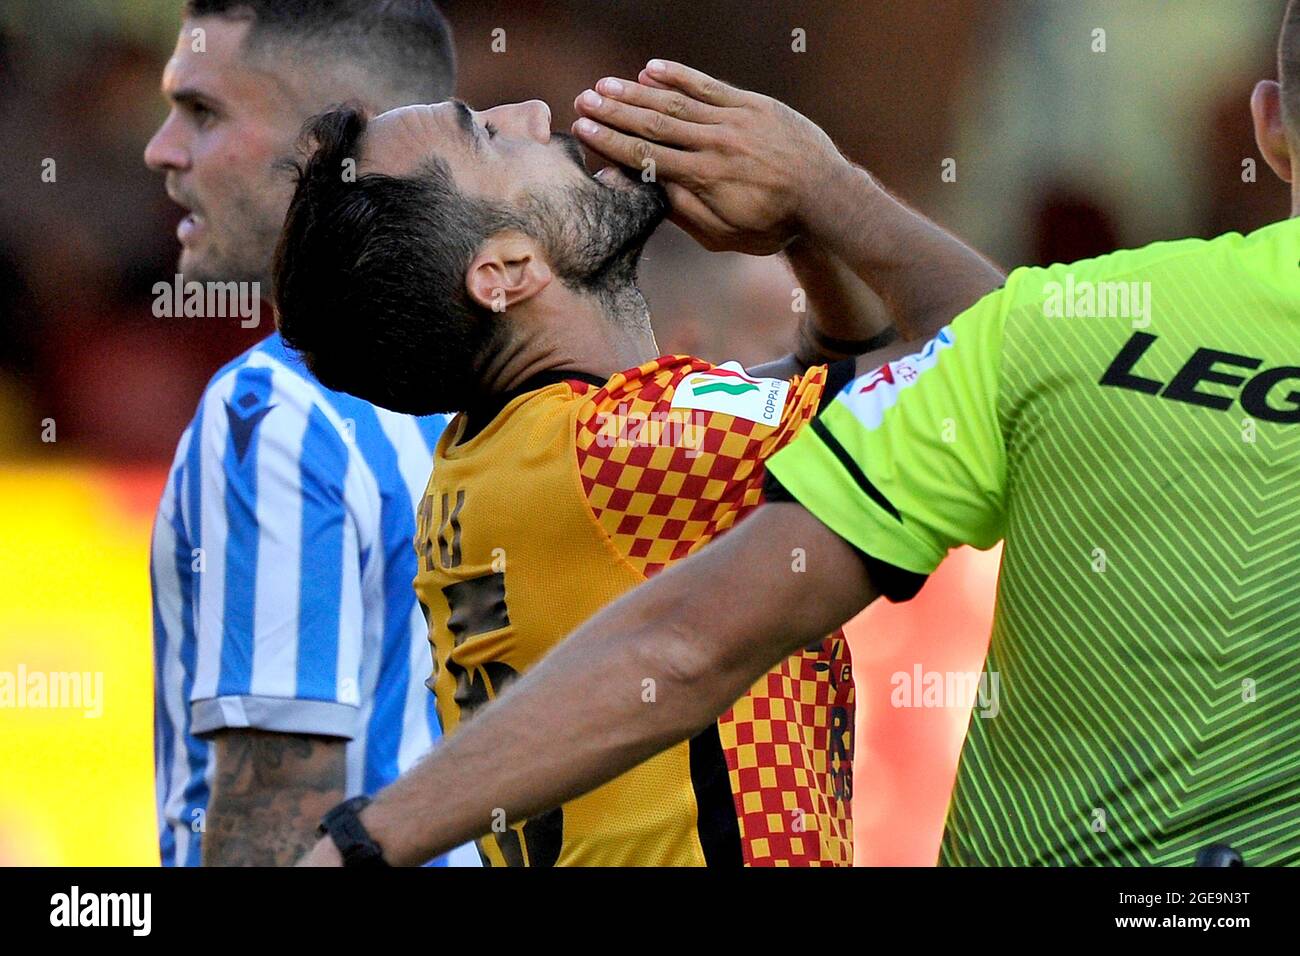 Marco Sau player of Benevento, during the Italian Cup match rta Benevento vs Spal final result 2-1, match played at the Ciro Vigorito stadium in Benev Stock Photo